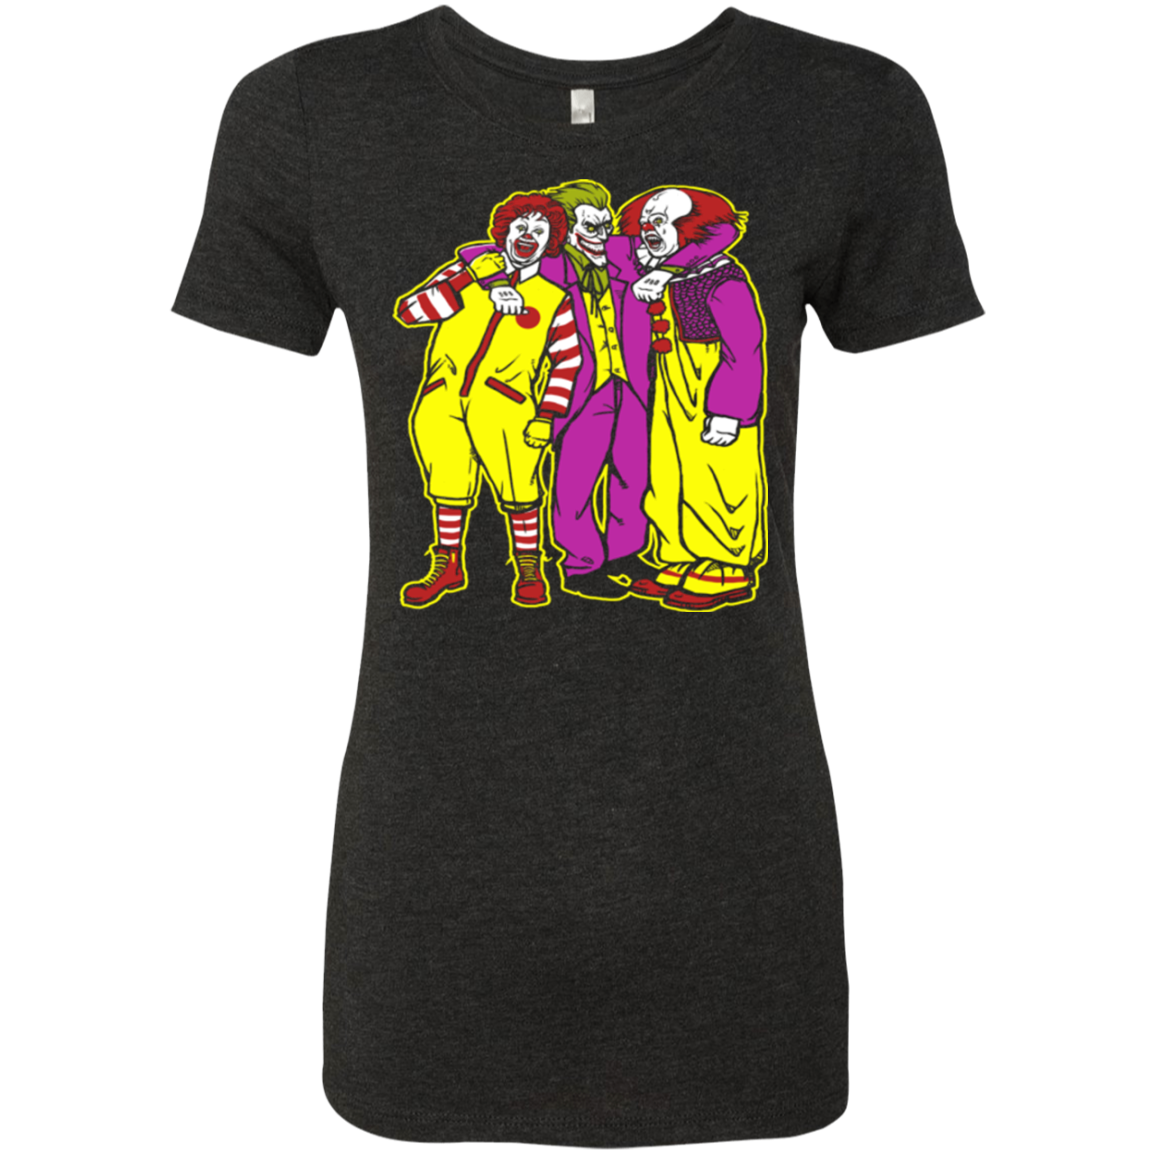 Whos Laughing Now Women's Triblend T-Shirt